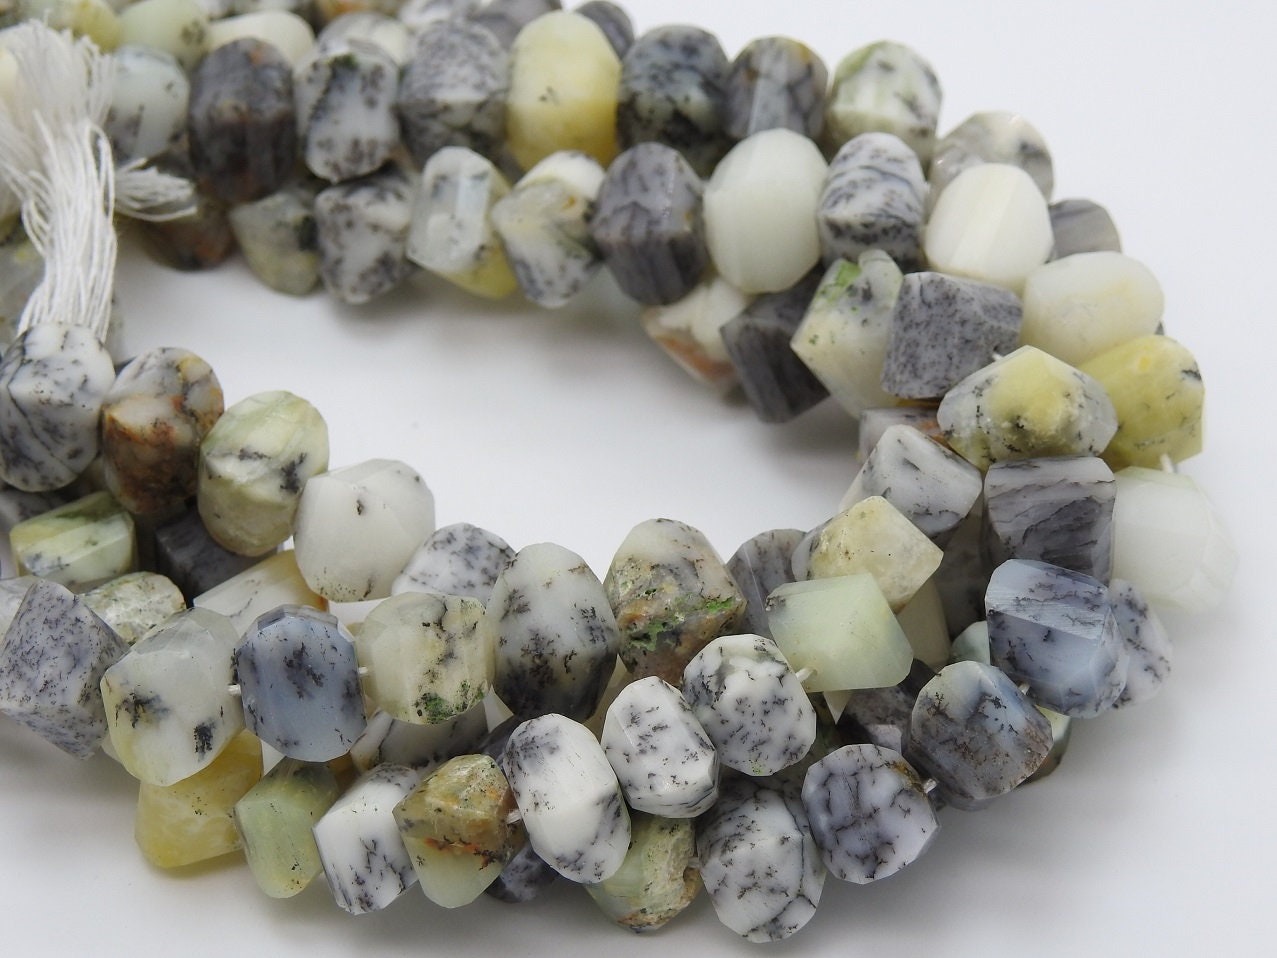 Dendrite Opal Faceted Twisted Beads,Fancy Cut,Round Shape,Handmade,Necklace,10Inch 10X10To8X8MM Approx,Wholesaler,Supplies PME-B8 | Save 33% - Rajasthan Living 17